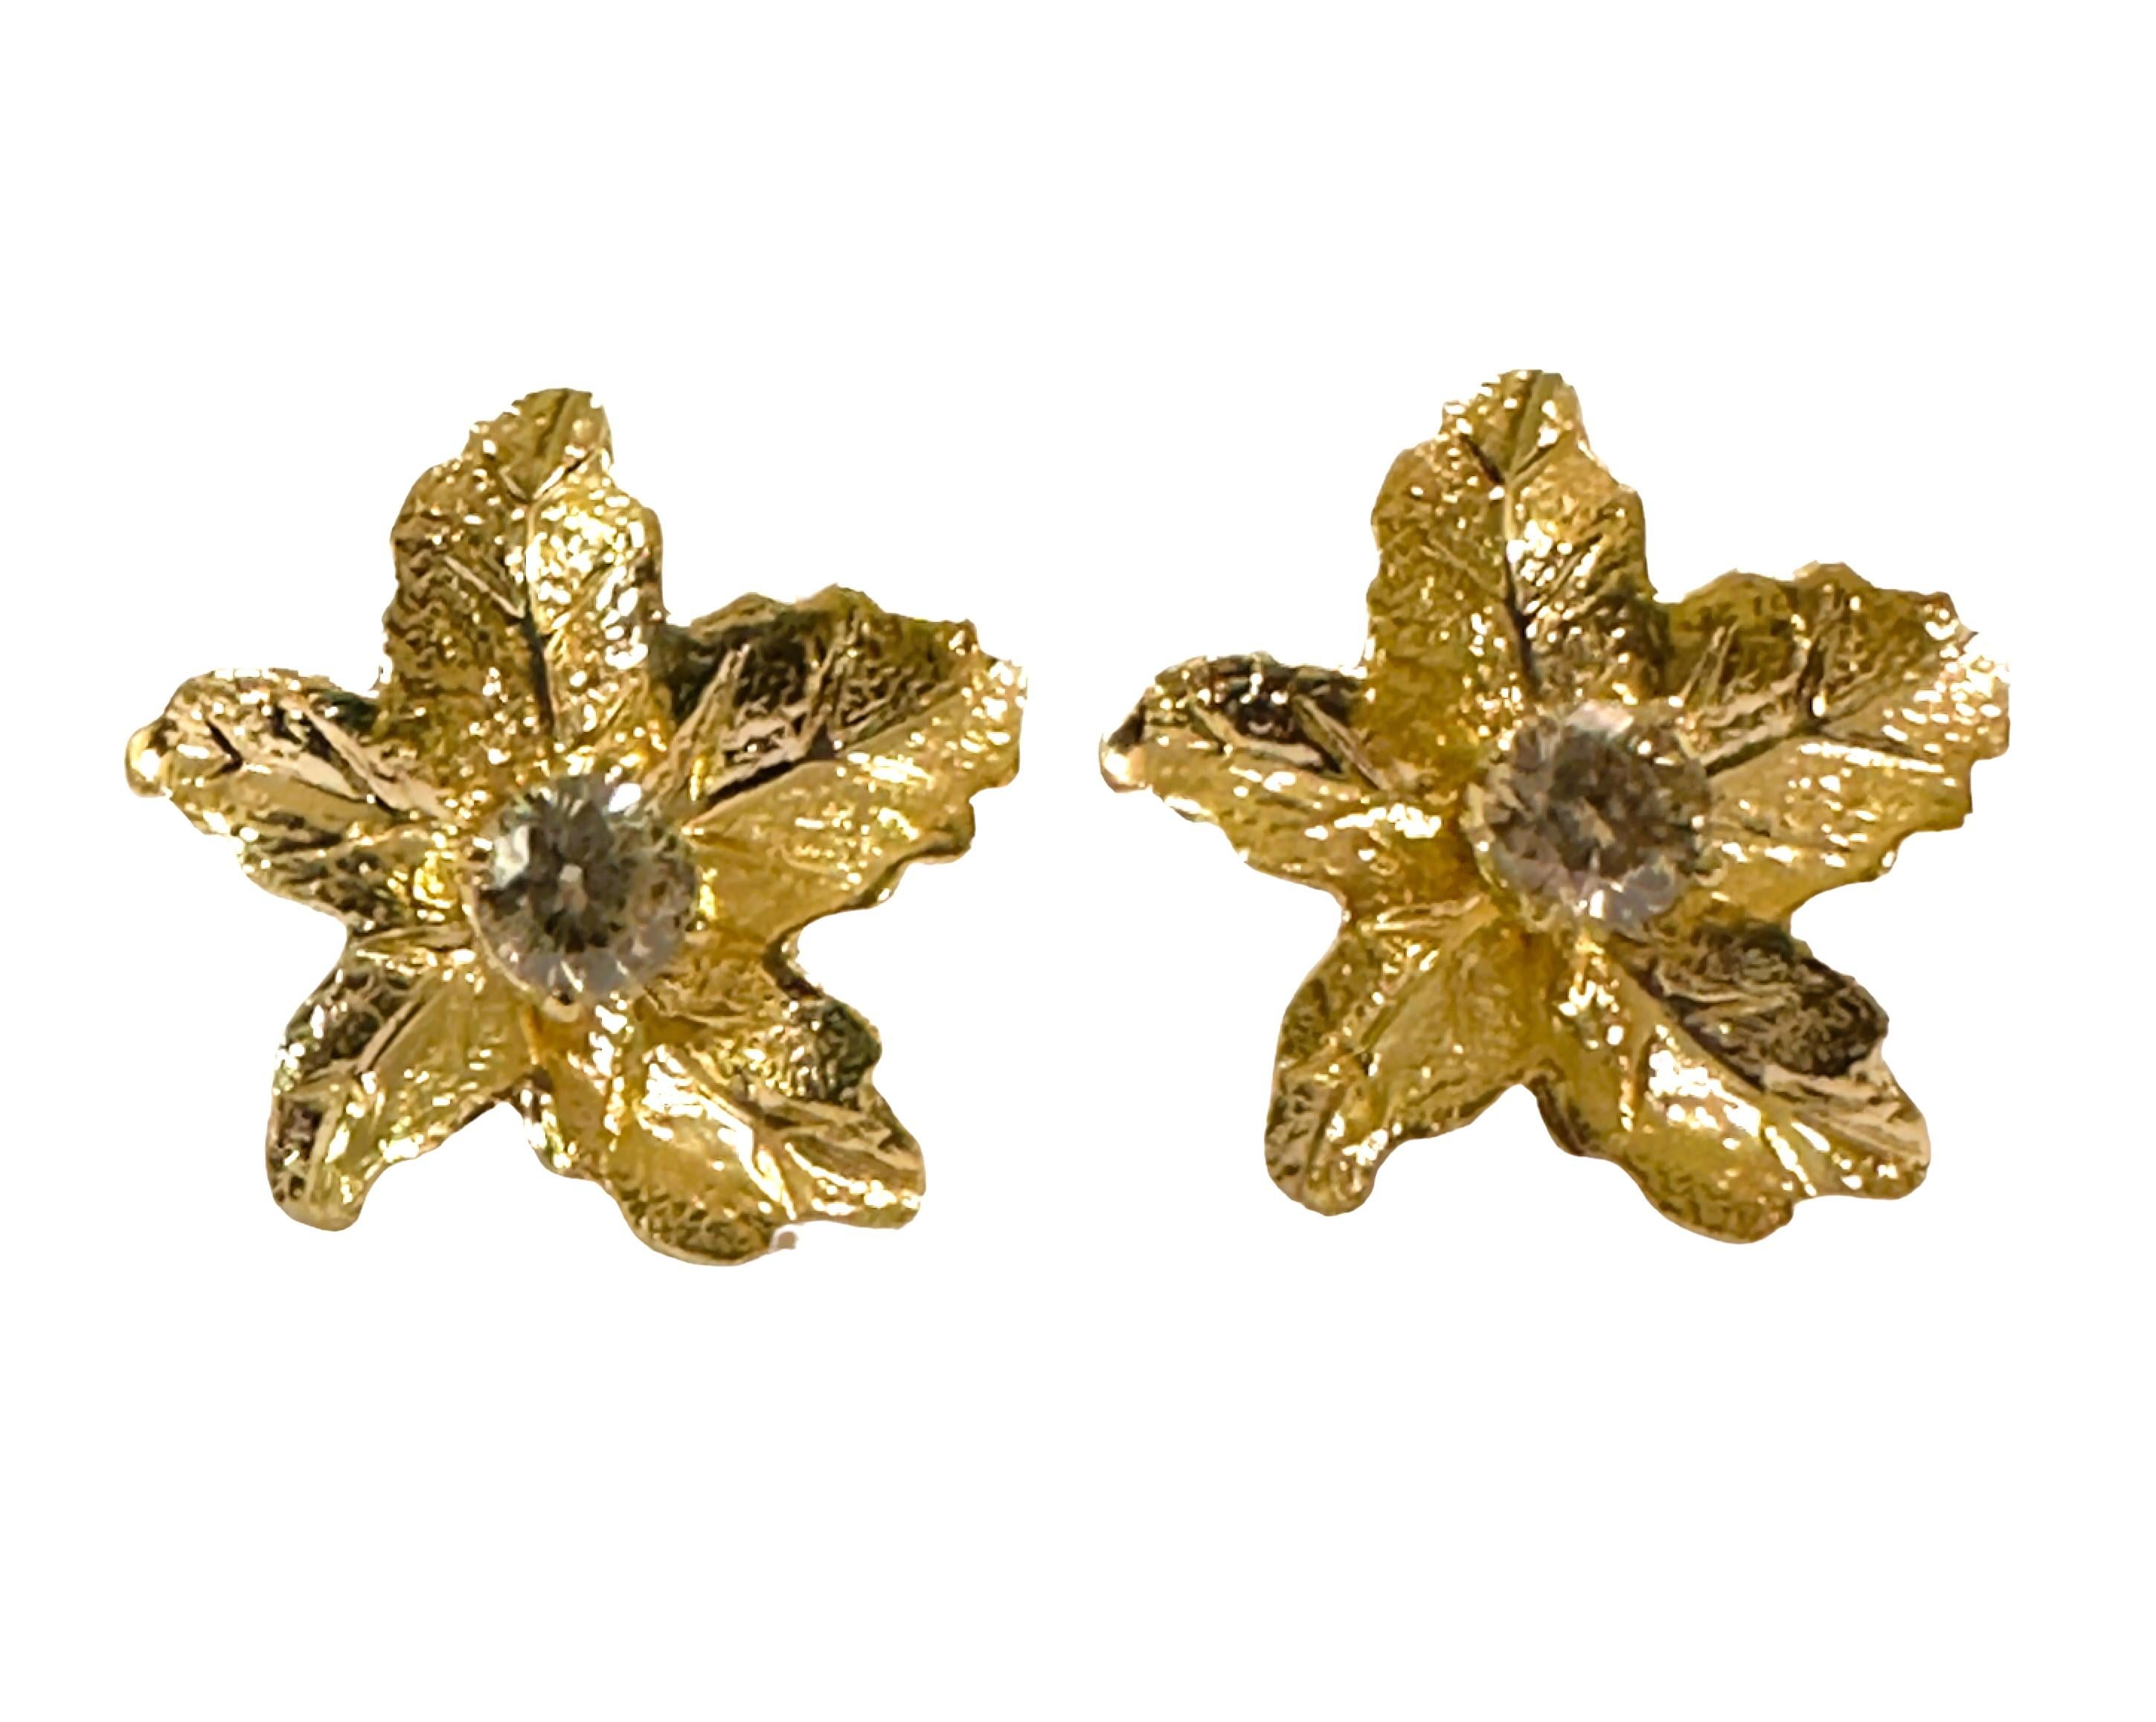 Brilliant Cut Diamond Studs with 14k Yellow Gold Leaf Jackets Earrings With Appraisal For Sale